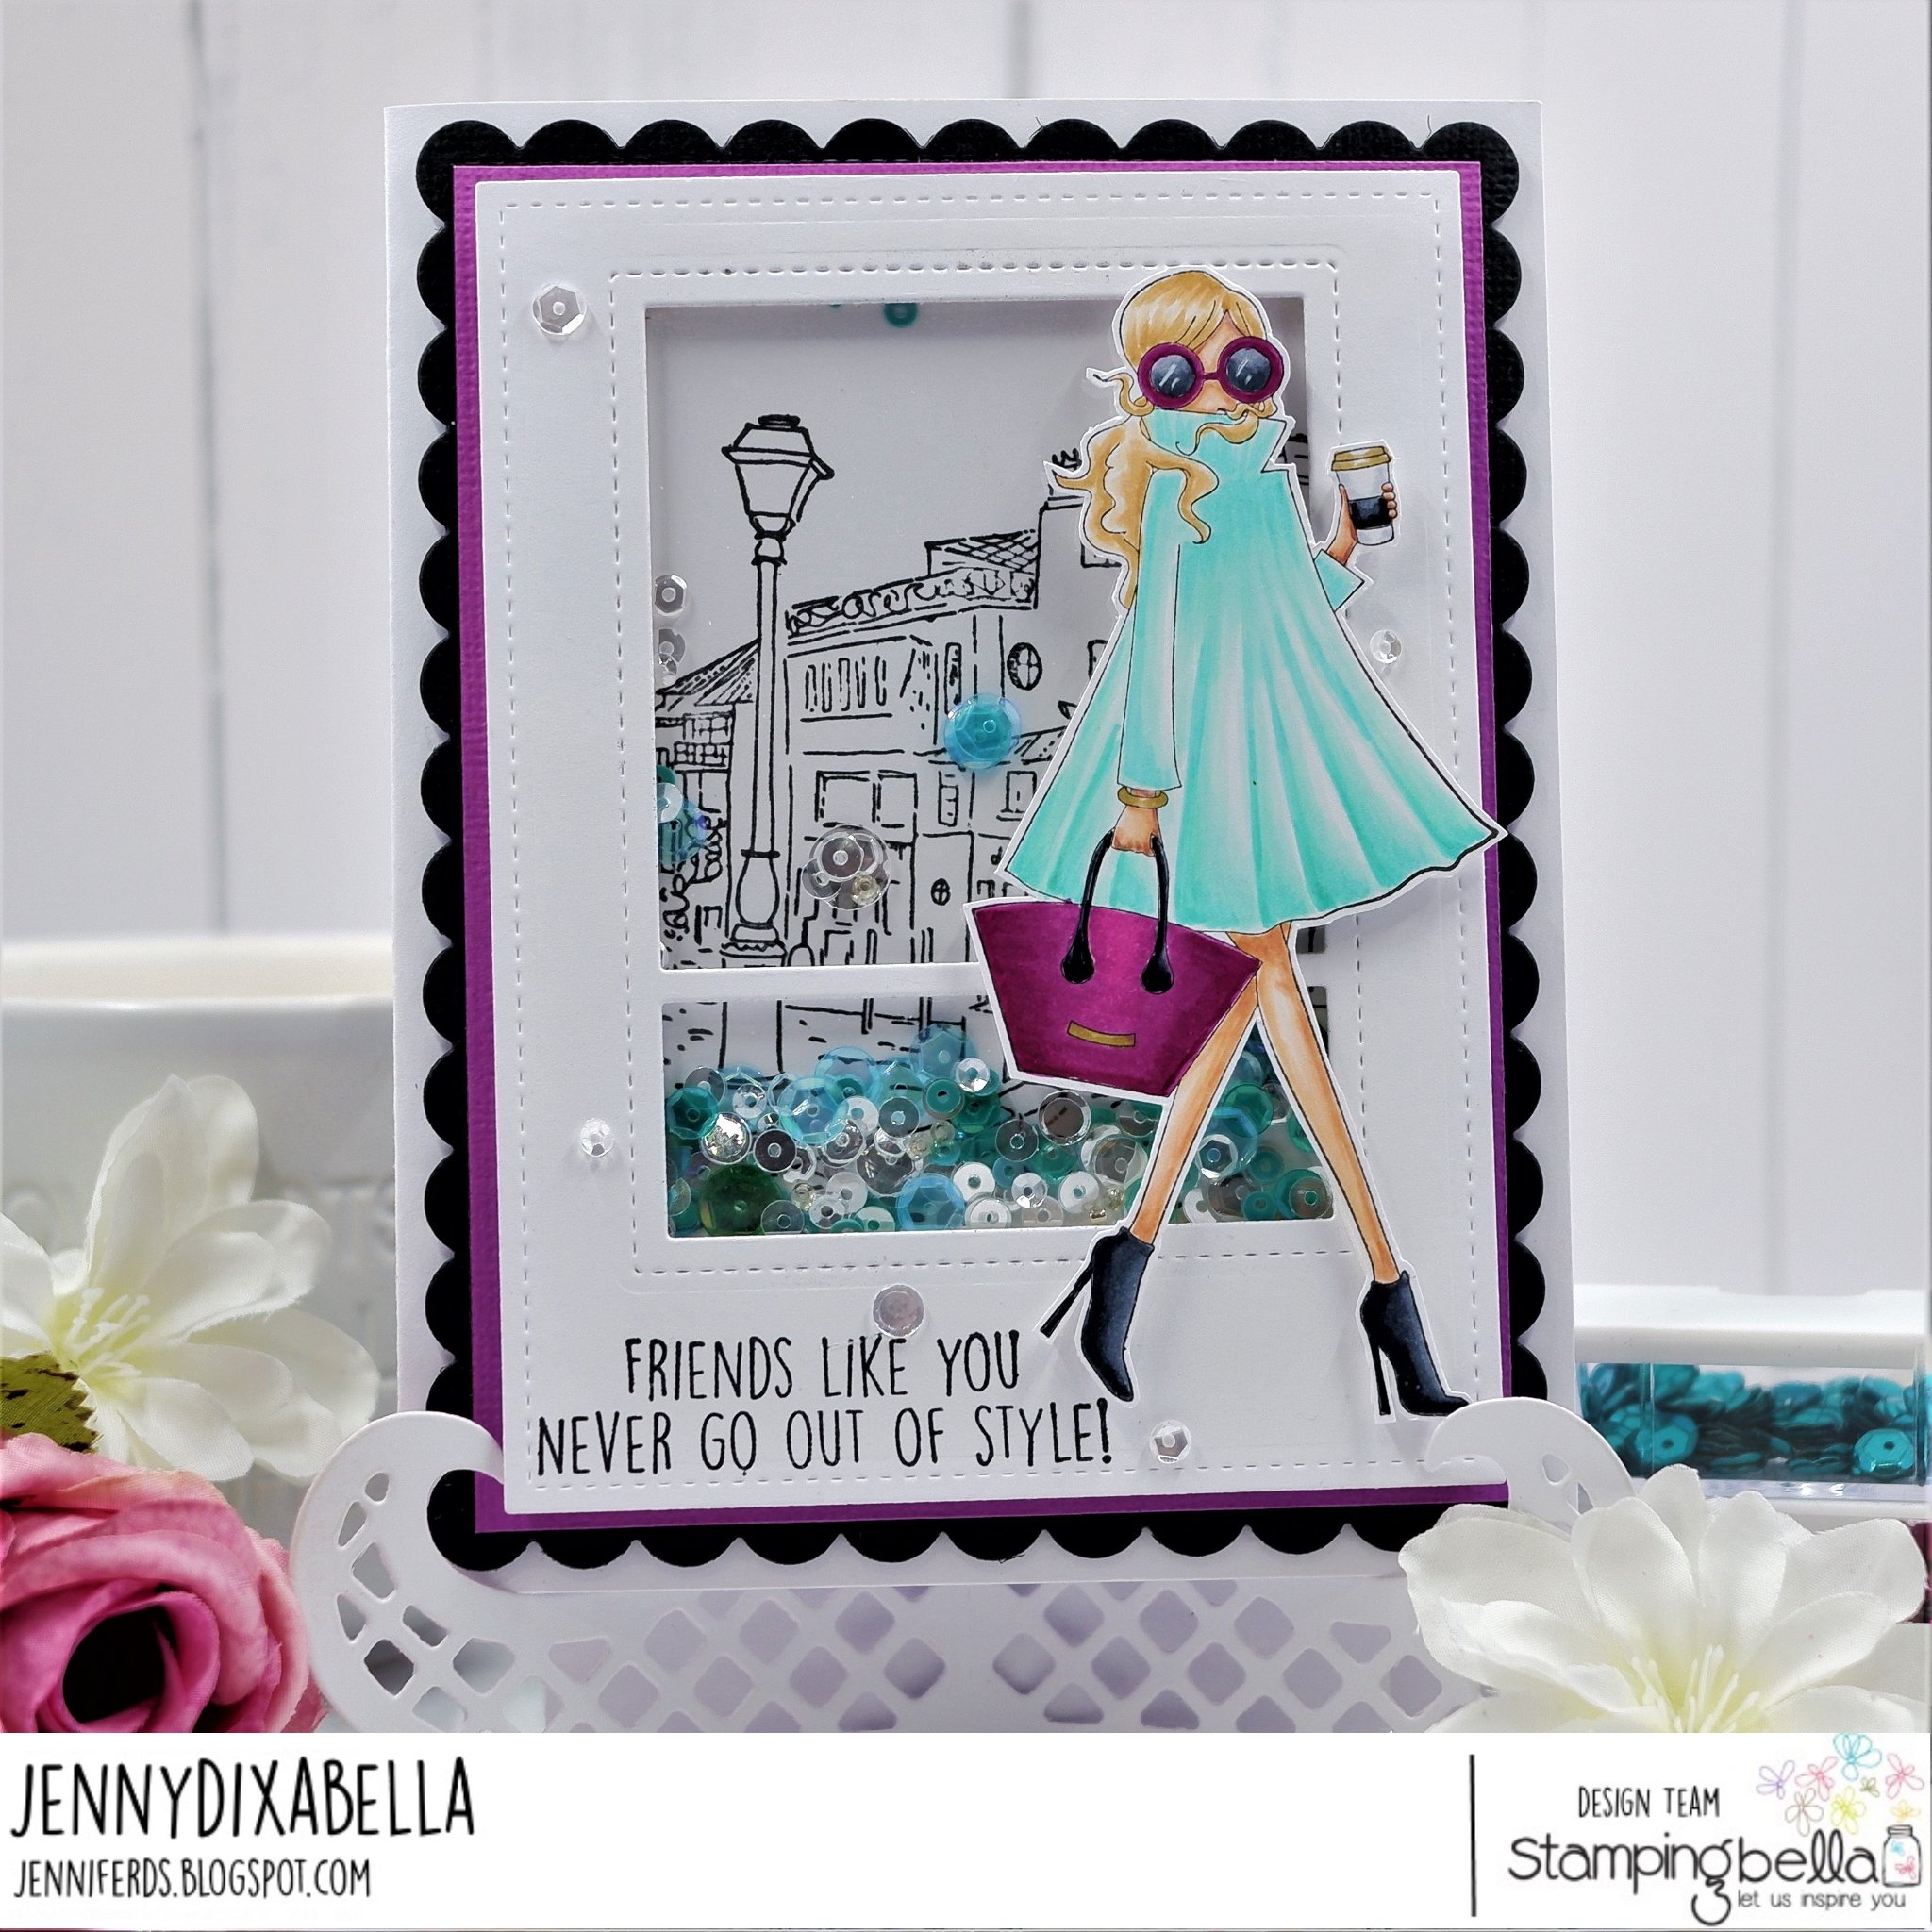 www.stampingbella.com: Rubber stamp used: Uptown girl FASHIONISTA, SKETCHY BACKDROP card by Jenny Dix